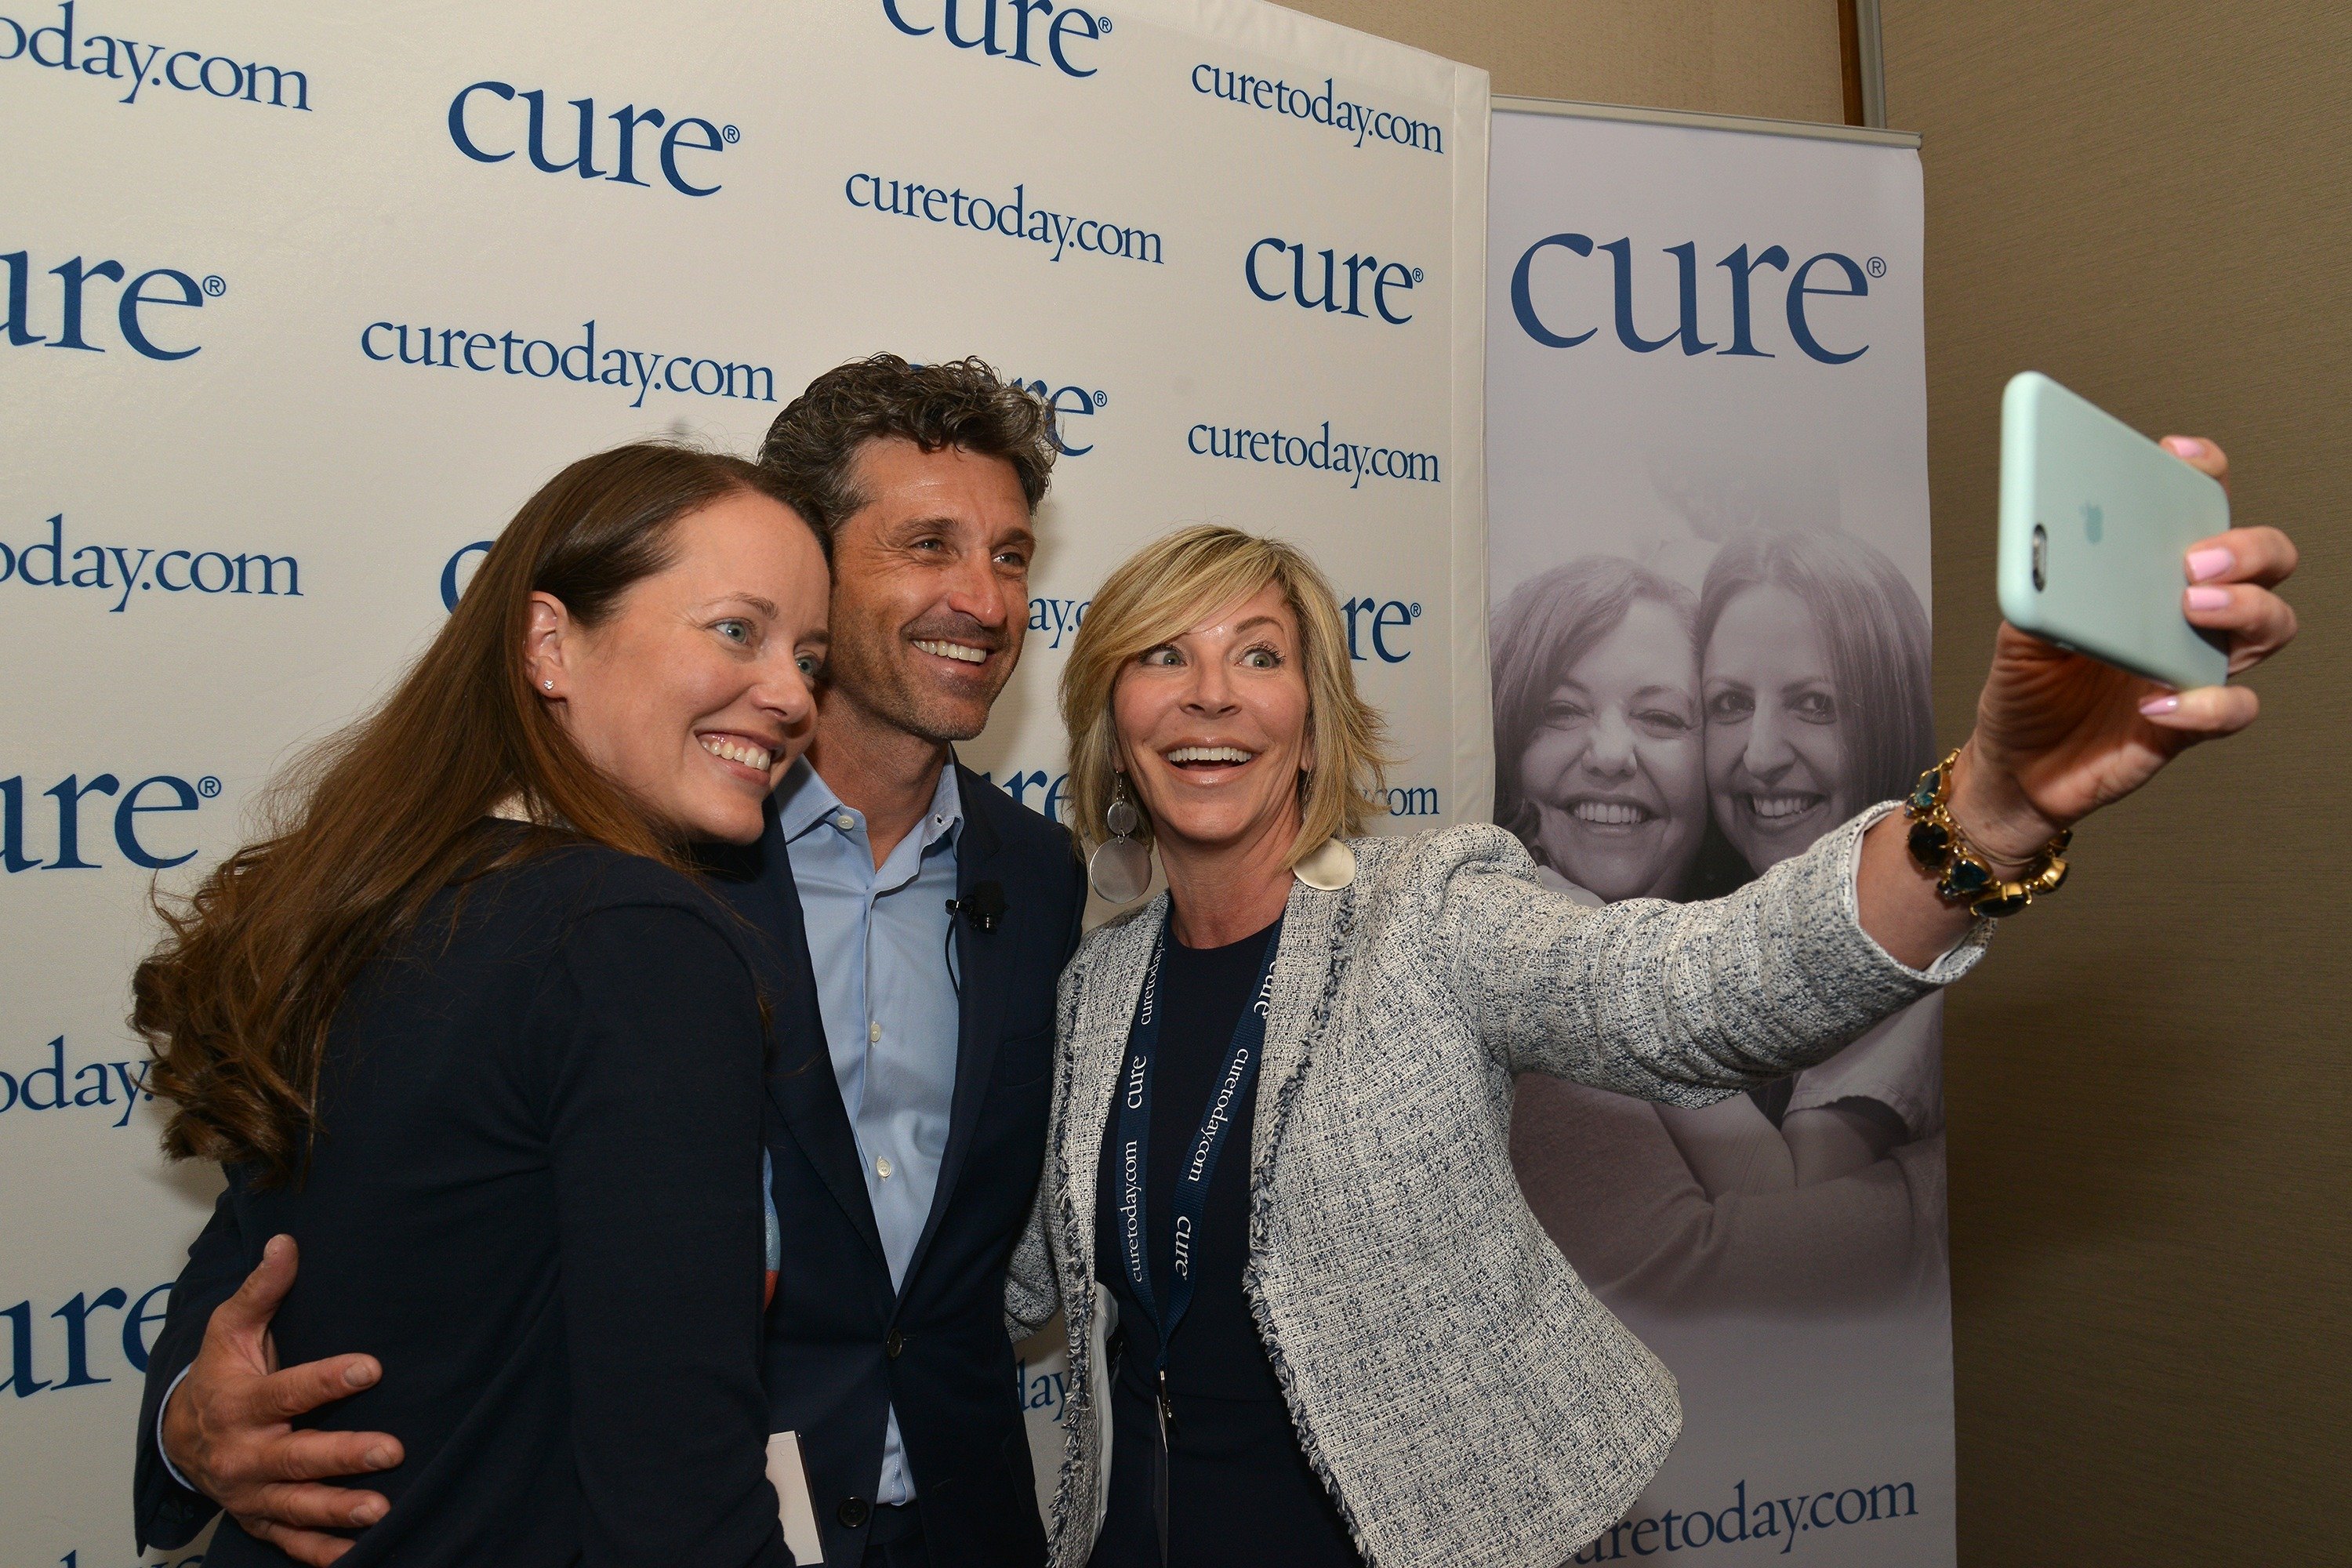 Patrick Dempsey poses for a selfie with Amanda Yopp and Kelly Buis at the 2017 CURE Magazine Extraordinary Healer Award for Oncology Nursing at the Hyatt Regency Denver at the Colorado Convention Center on May 4, 2017 in Denver, Colorado | Source: Getty Images